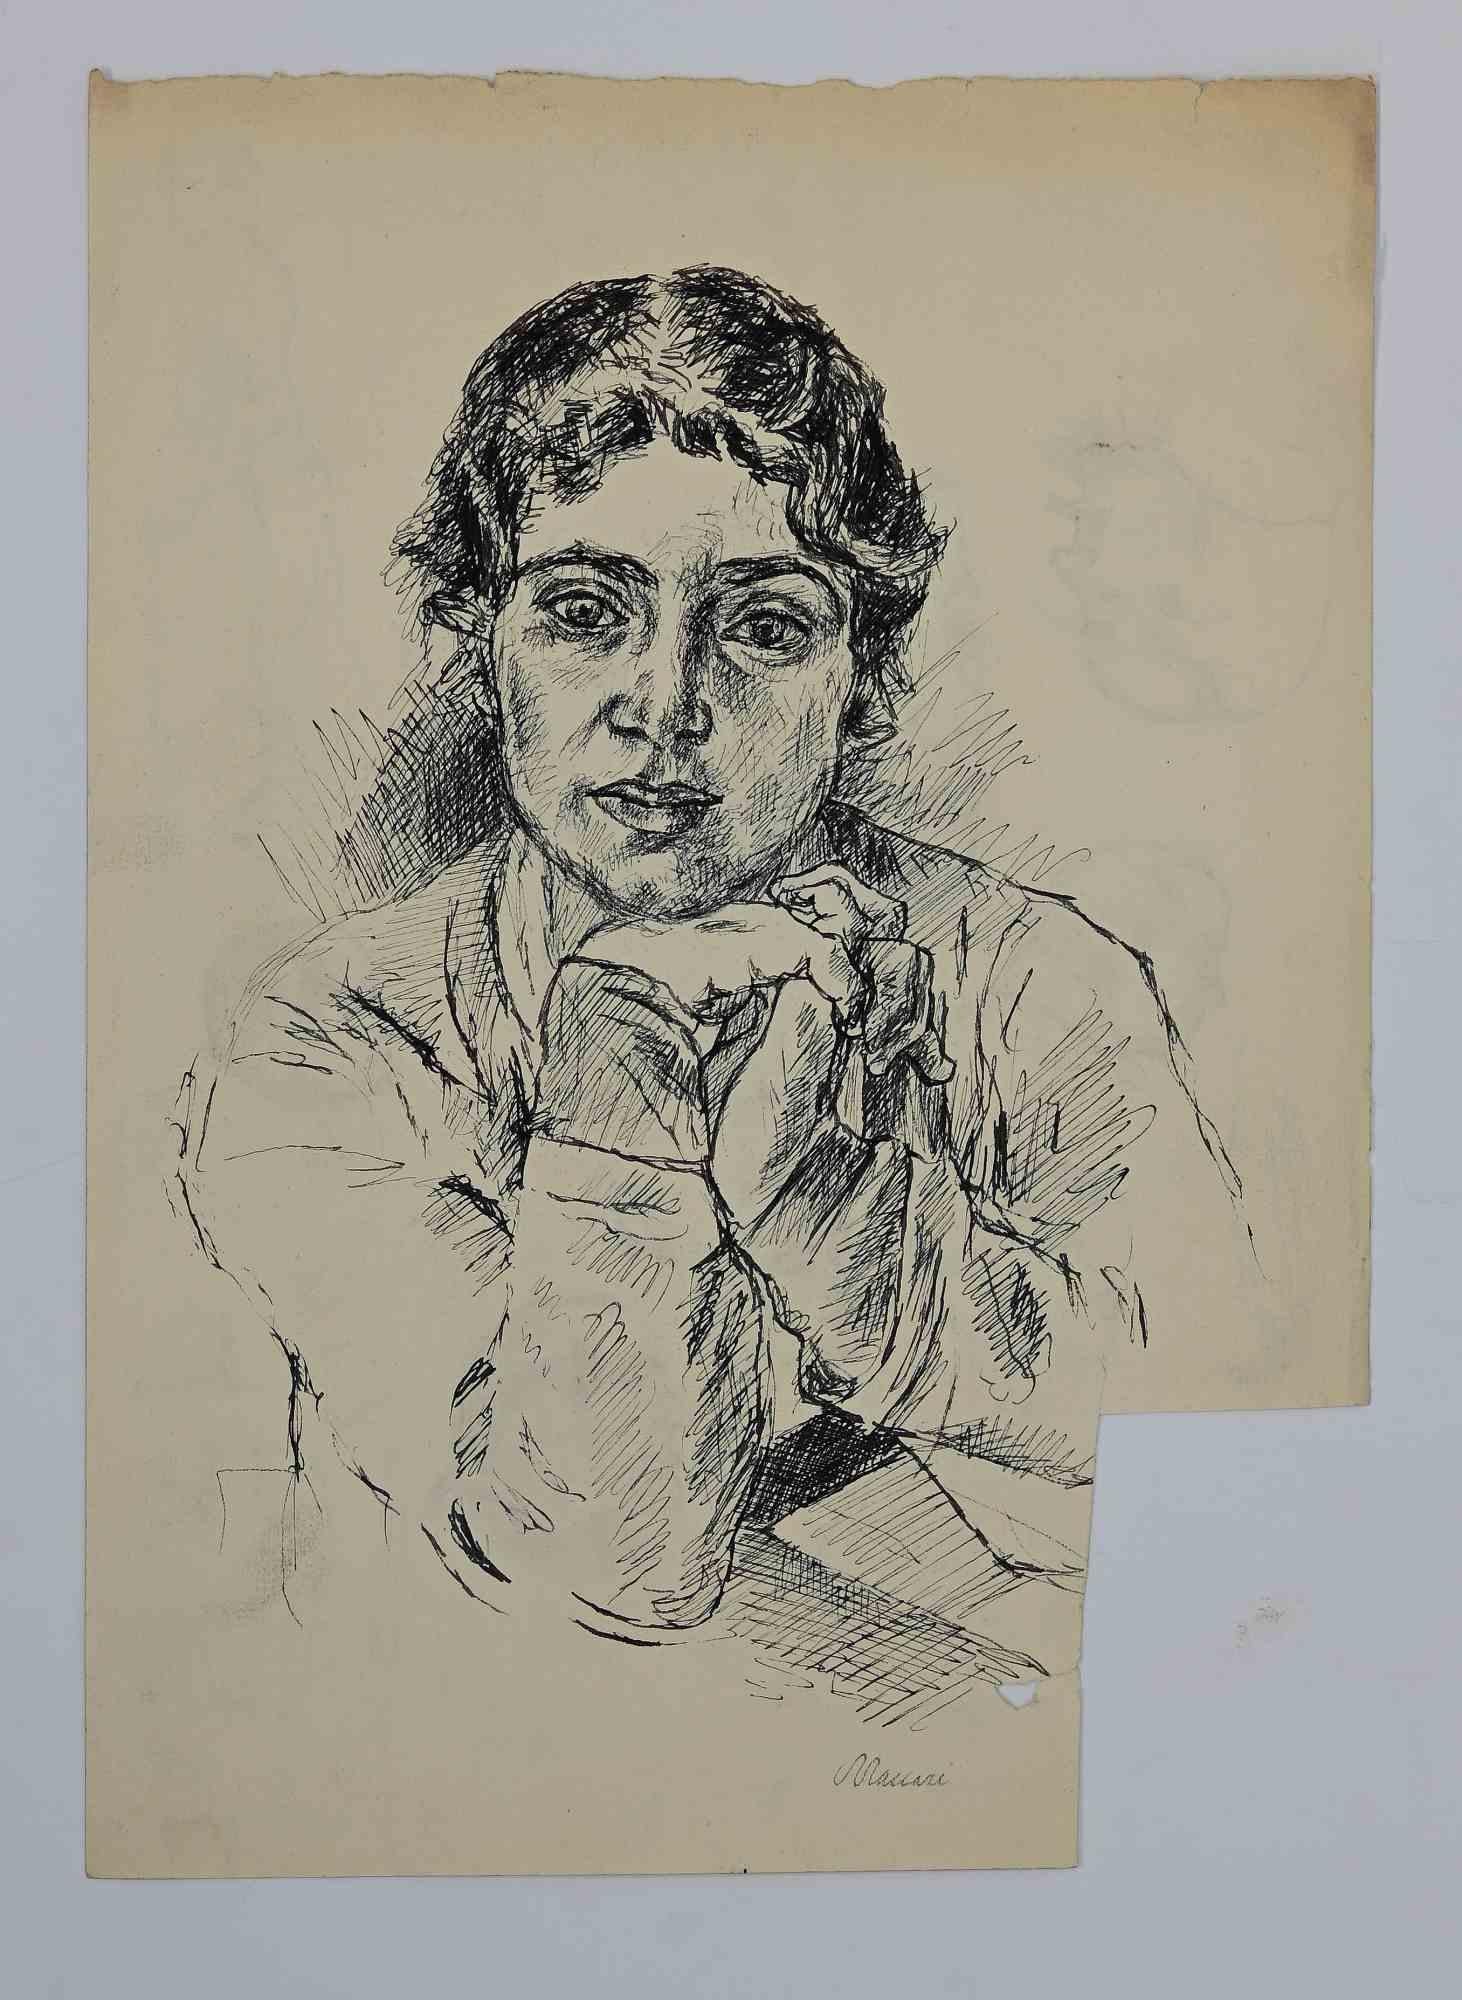 Portraits is an original Pencil Drawing realized by Mino Maccari in mid-20th century.

Good condition except for a missing corner of the yellowed paper.

Hand-signed by the artist with pencil, some sketches on the back.

Mino Maccari (1898-1989) was